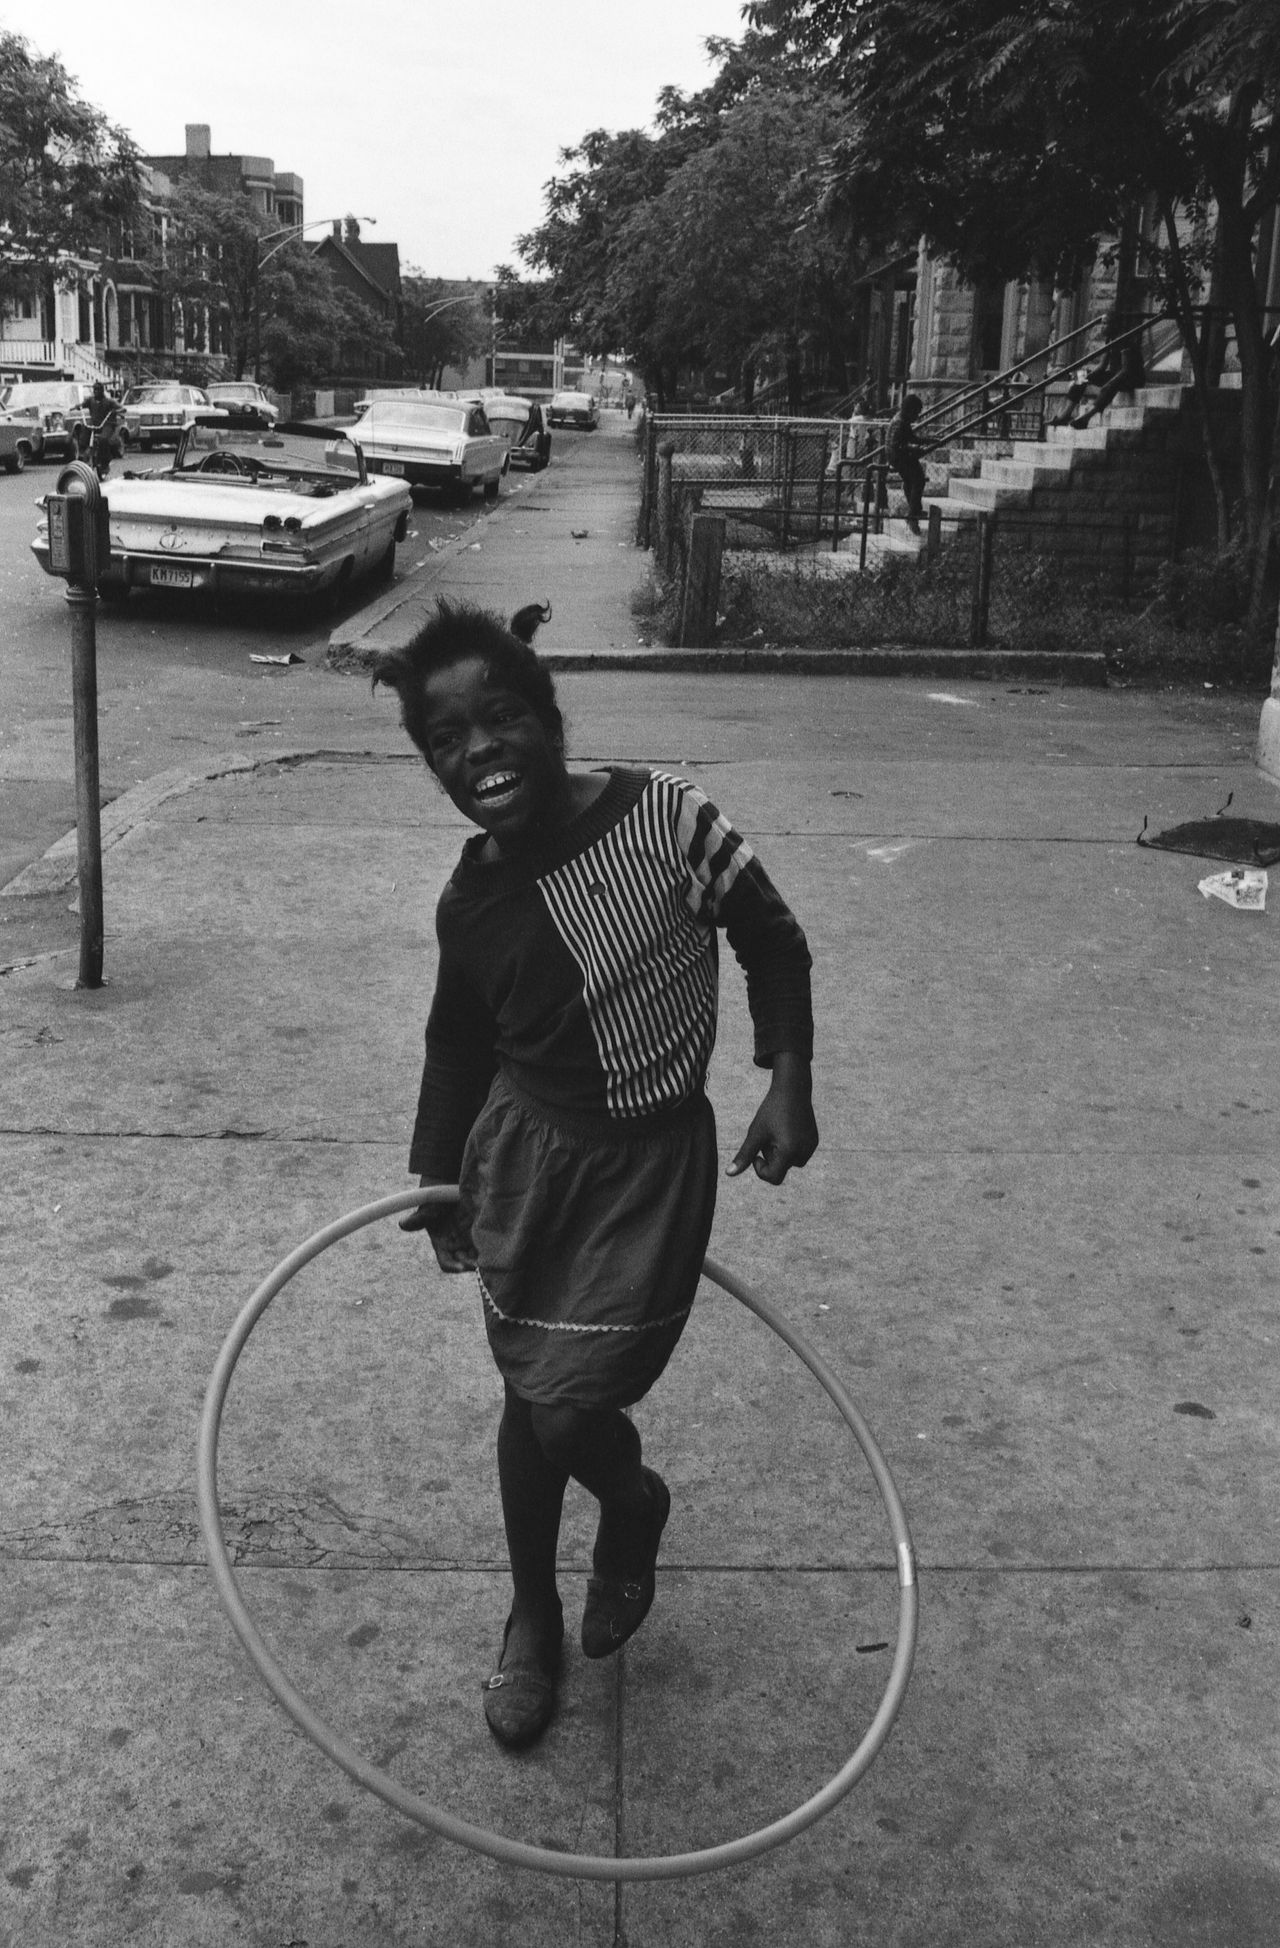 A girl twirls a toy hoop in Chicago sometime in the mid- to late 1960s.